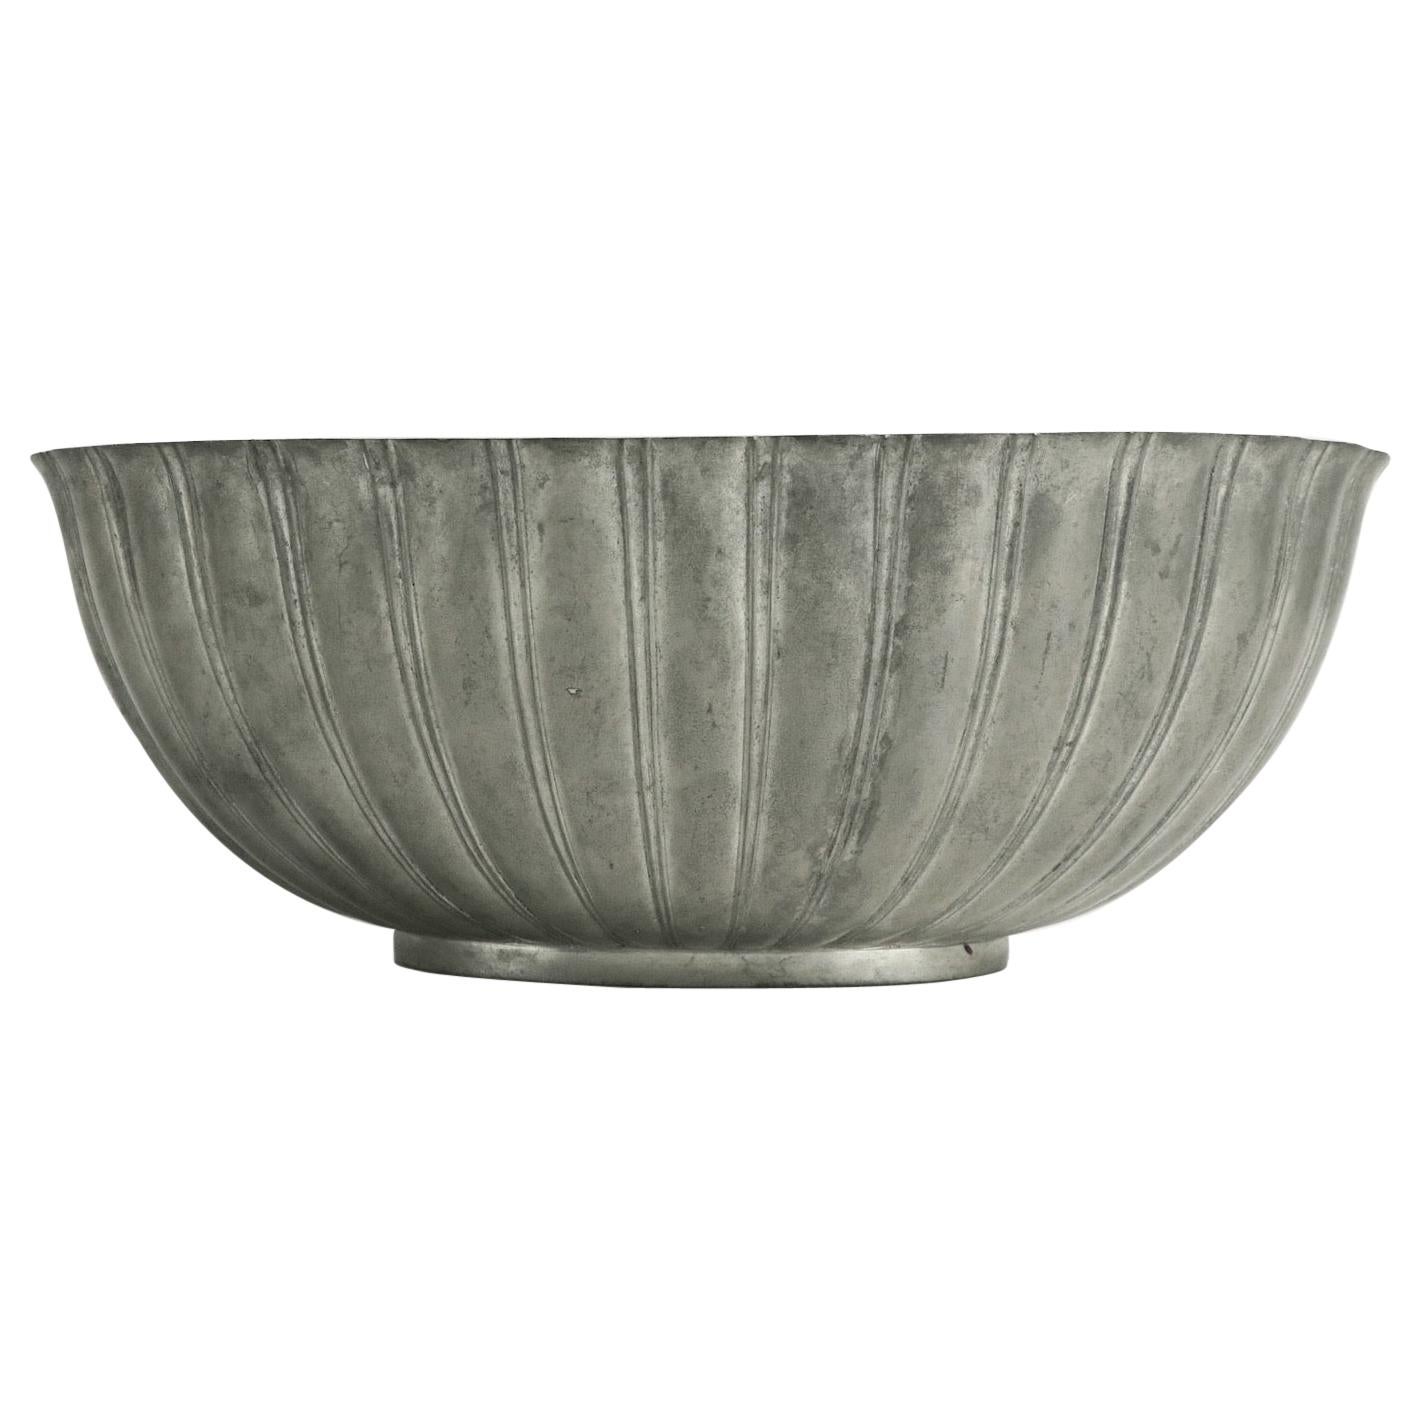 Art Deco Scalloped Edge Pewter Bowl by Just Andersen, Made in Denmark